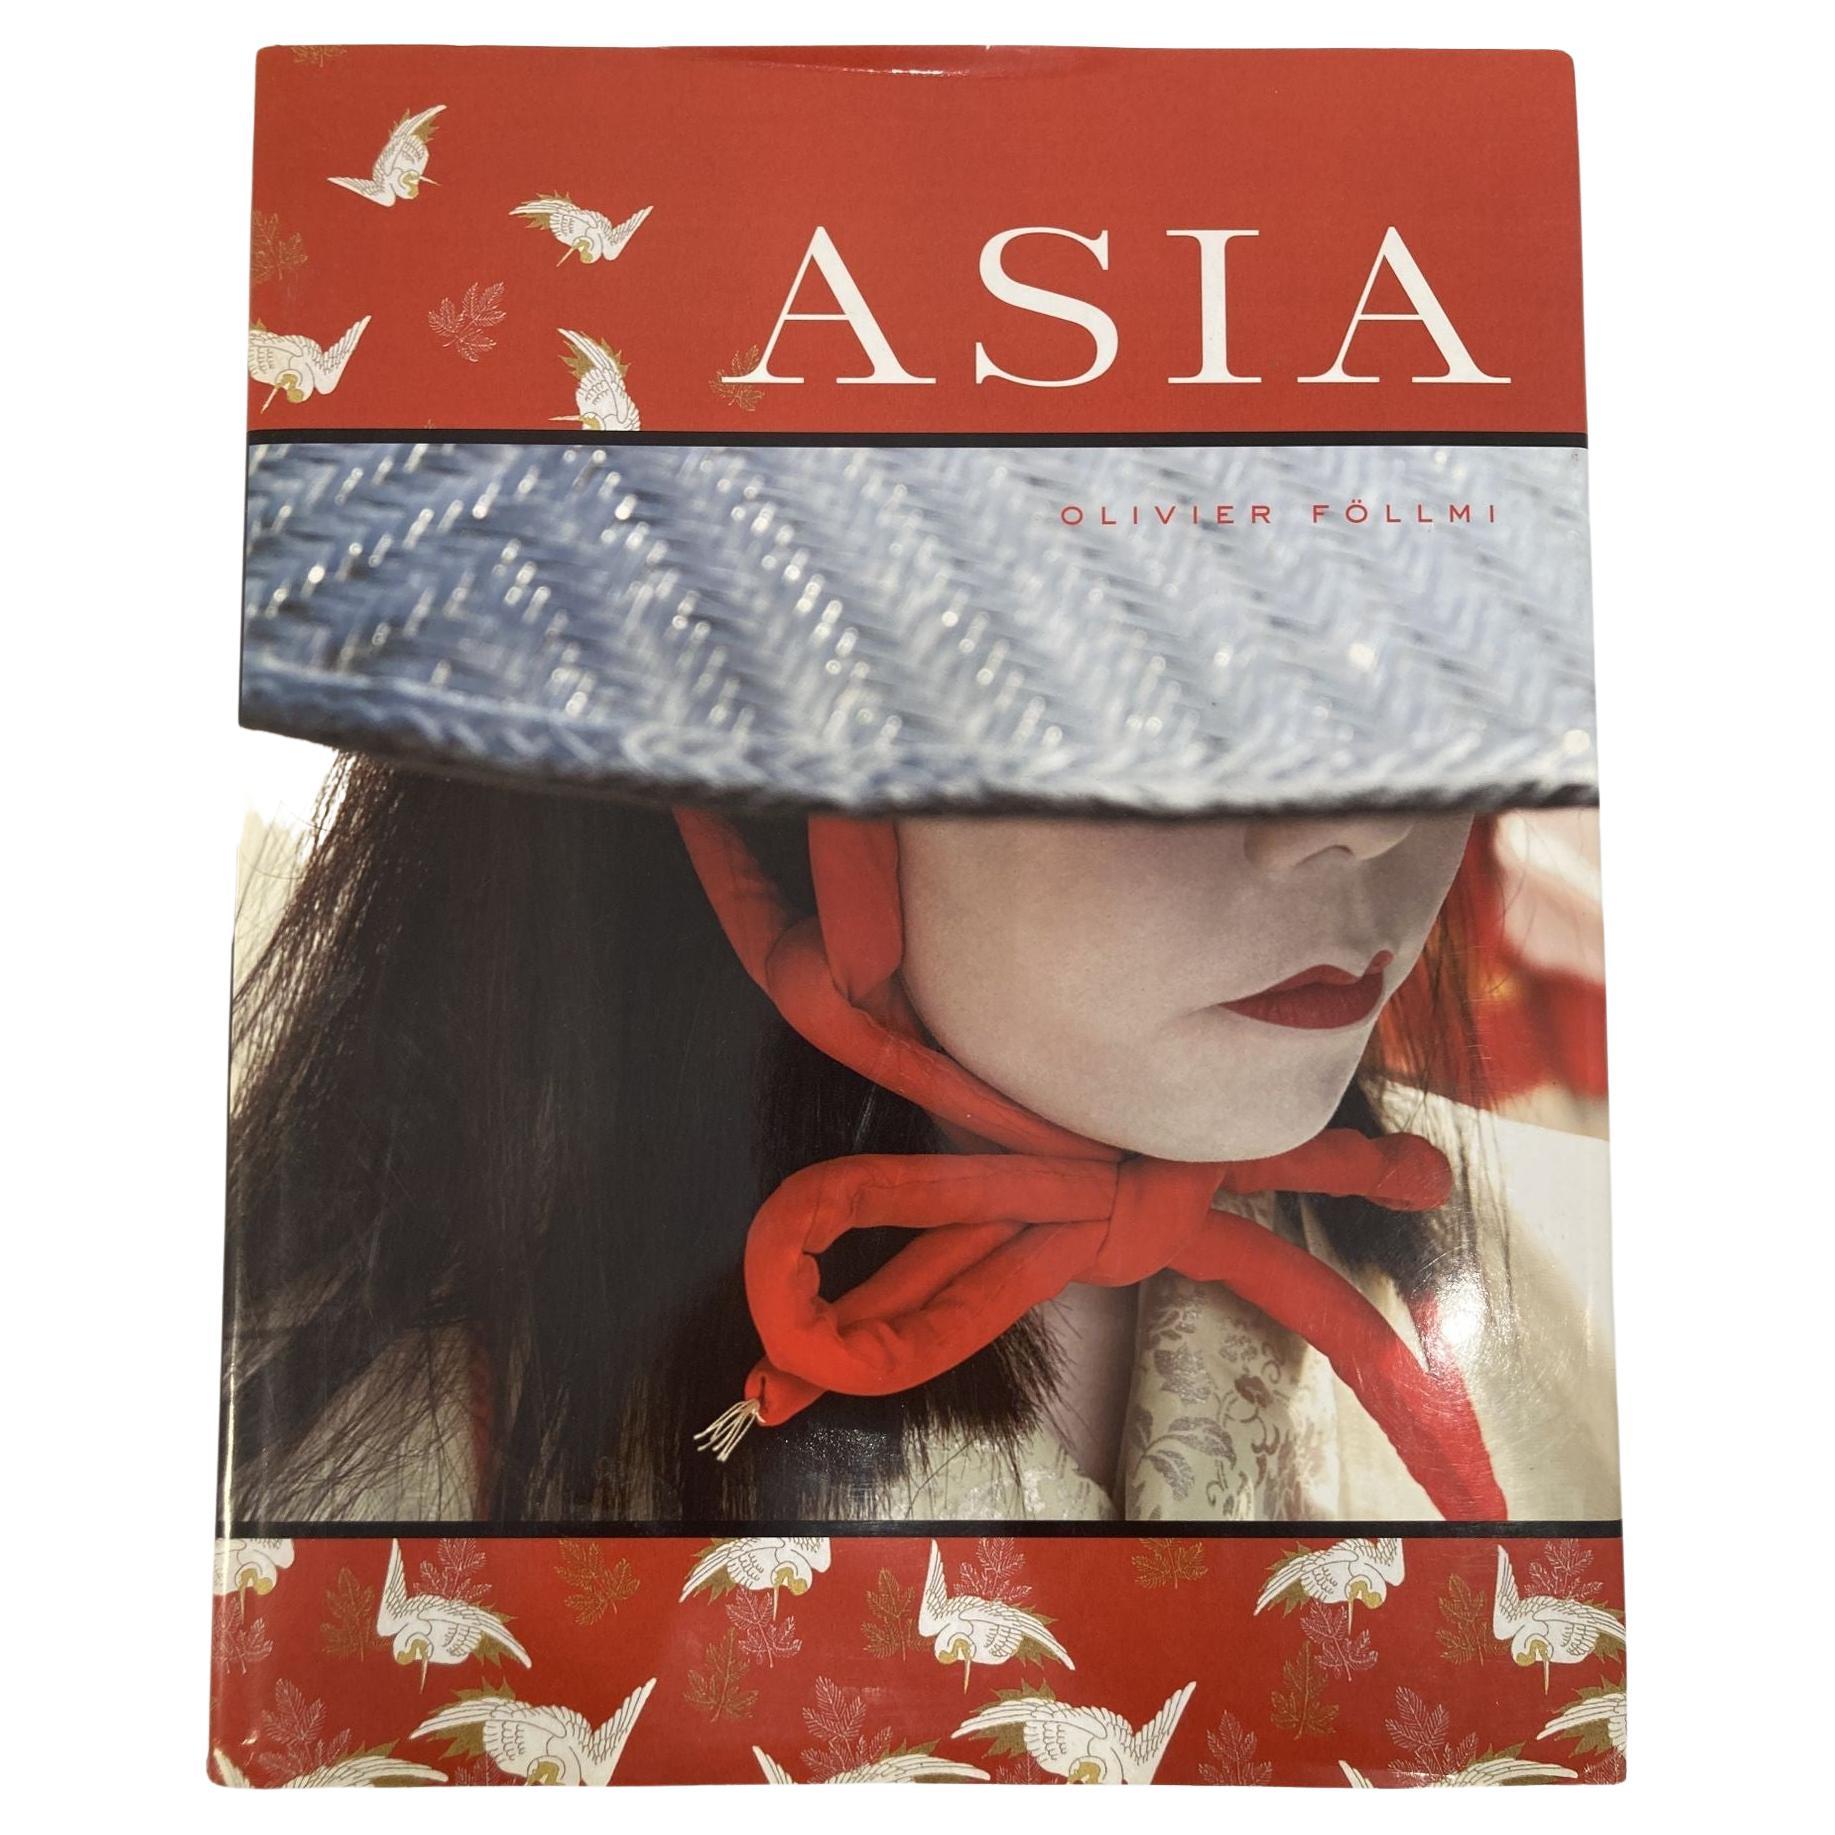 Asia by Olivier Follmi Large Hardcover Book 2008